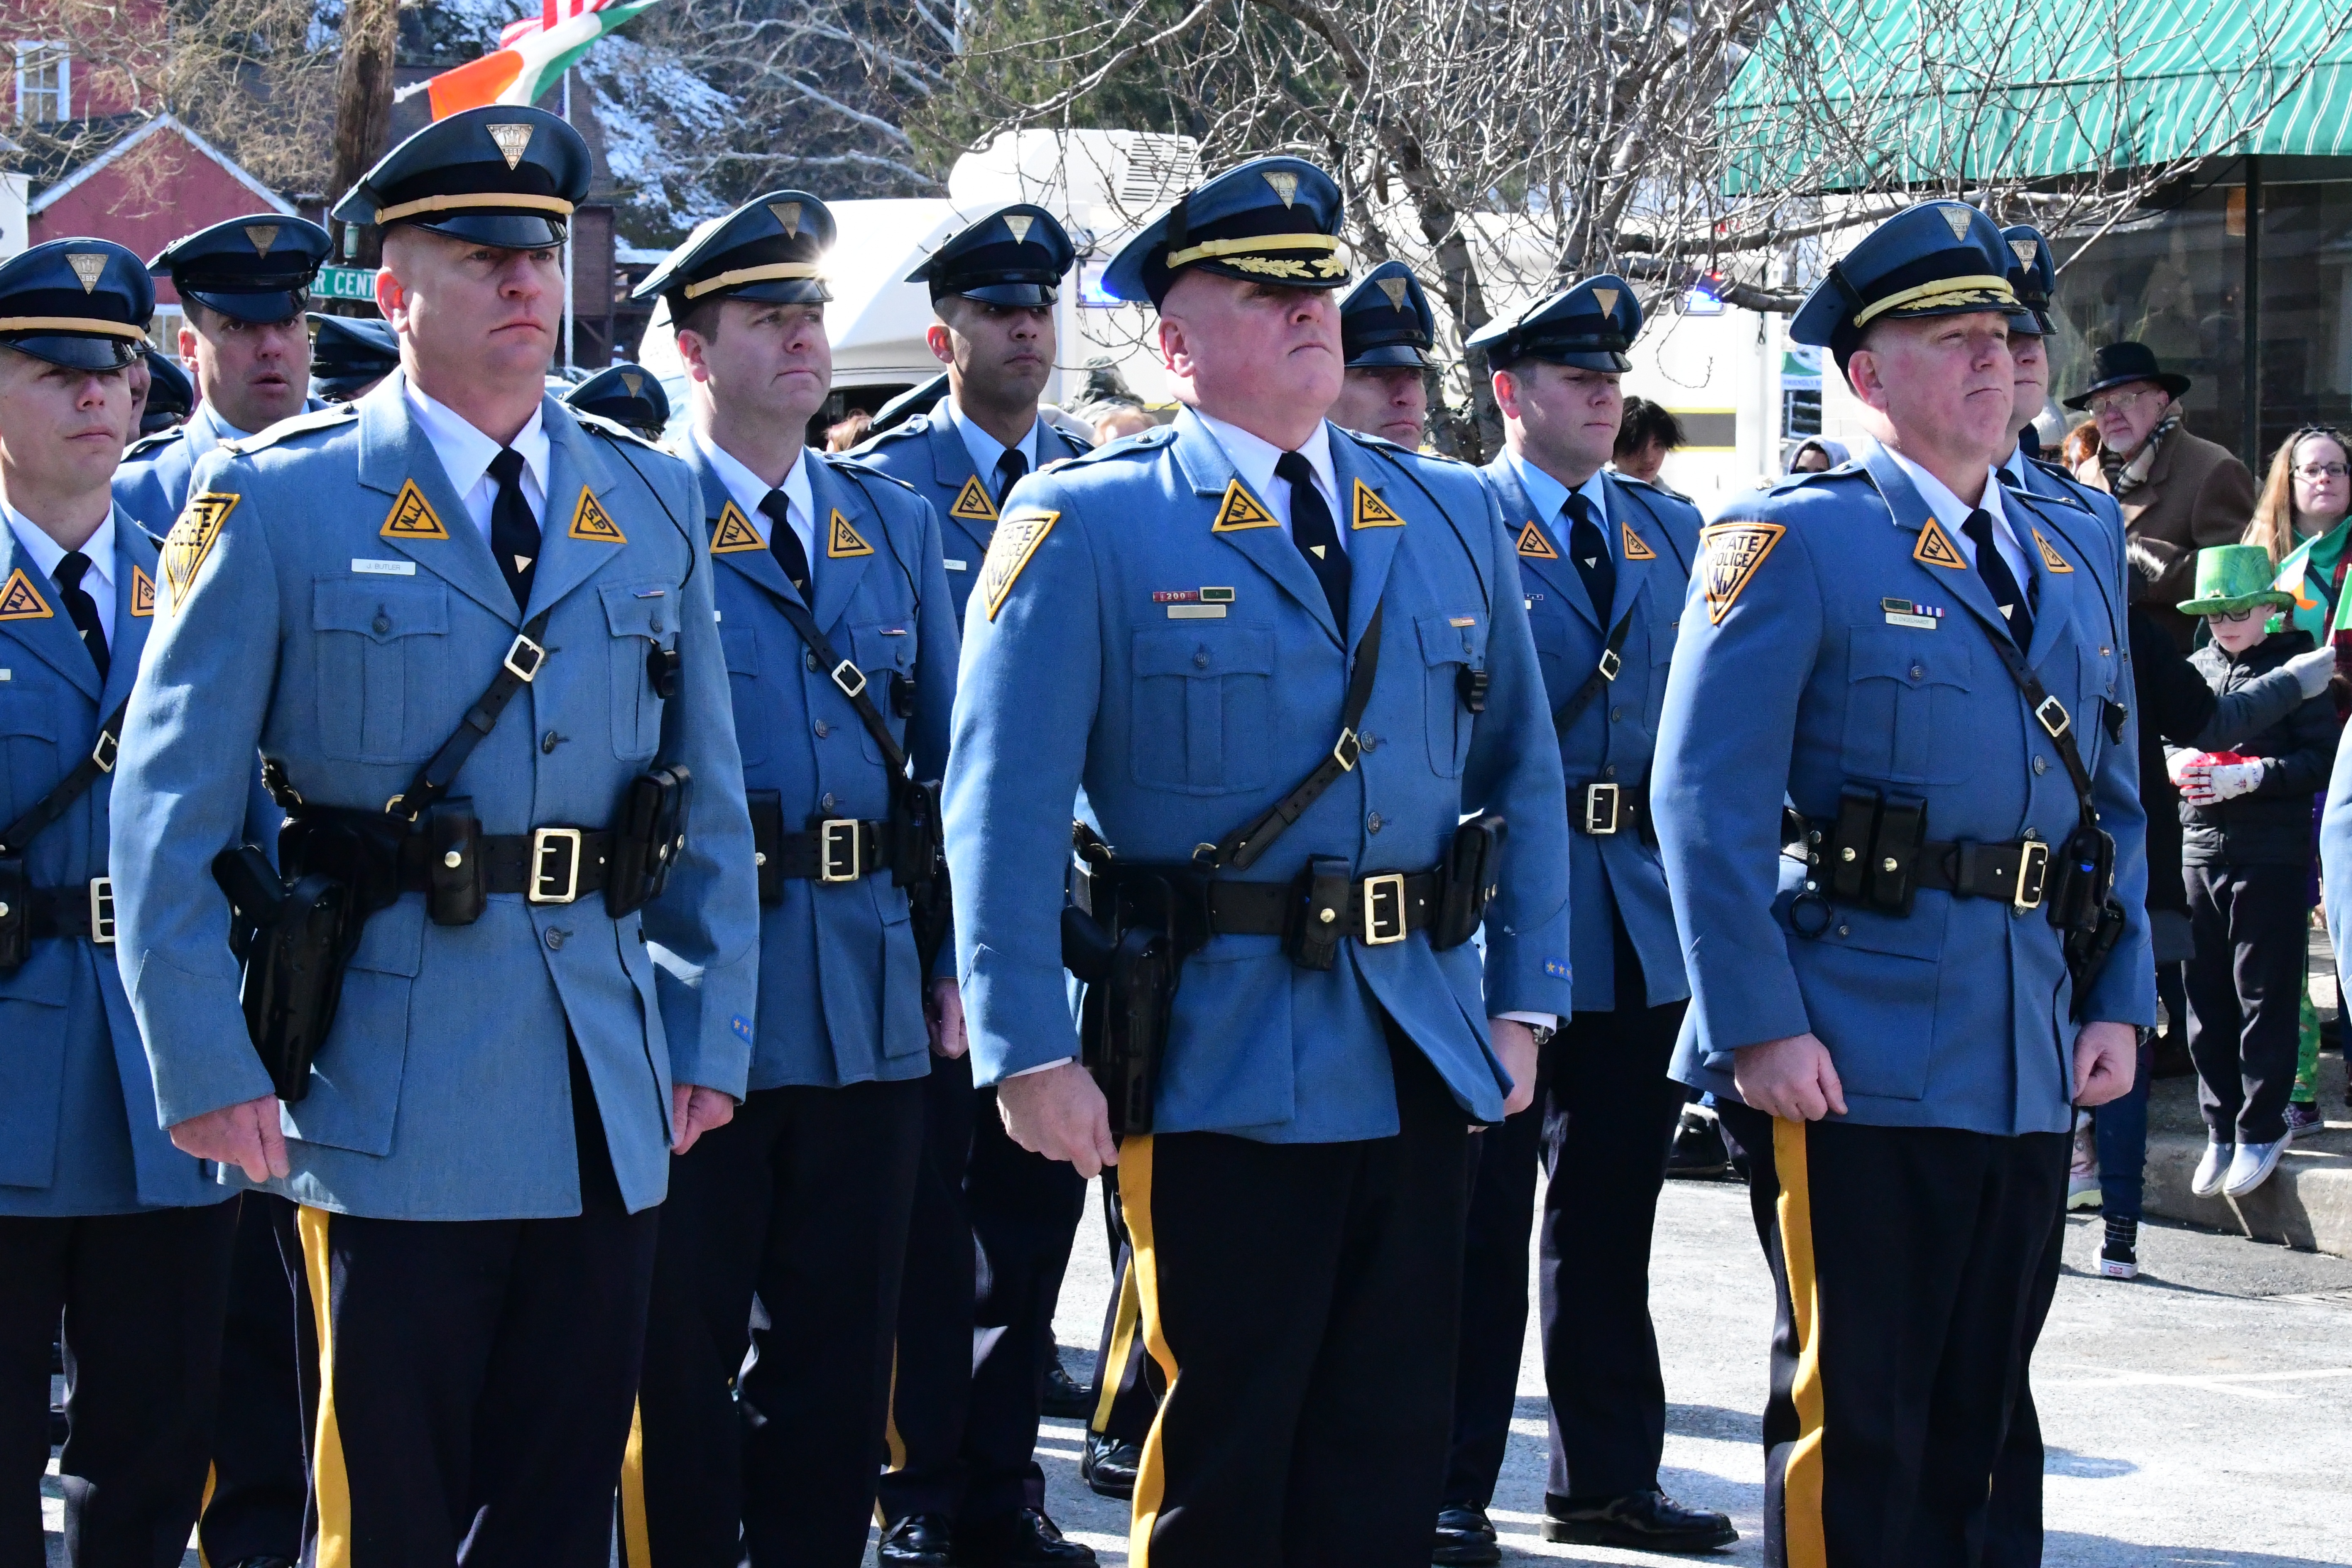 The 2022 St Patrick's Day Parade hosted by the Friendly Sons of St Patrick Hunterdon County took place in Clinton on March 13. Here, New Jersey State Police.